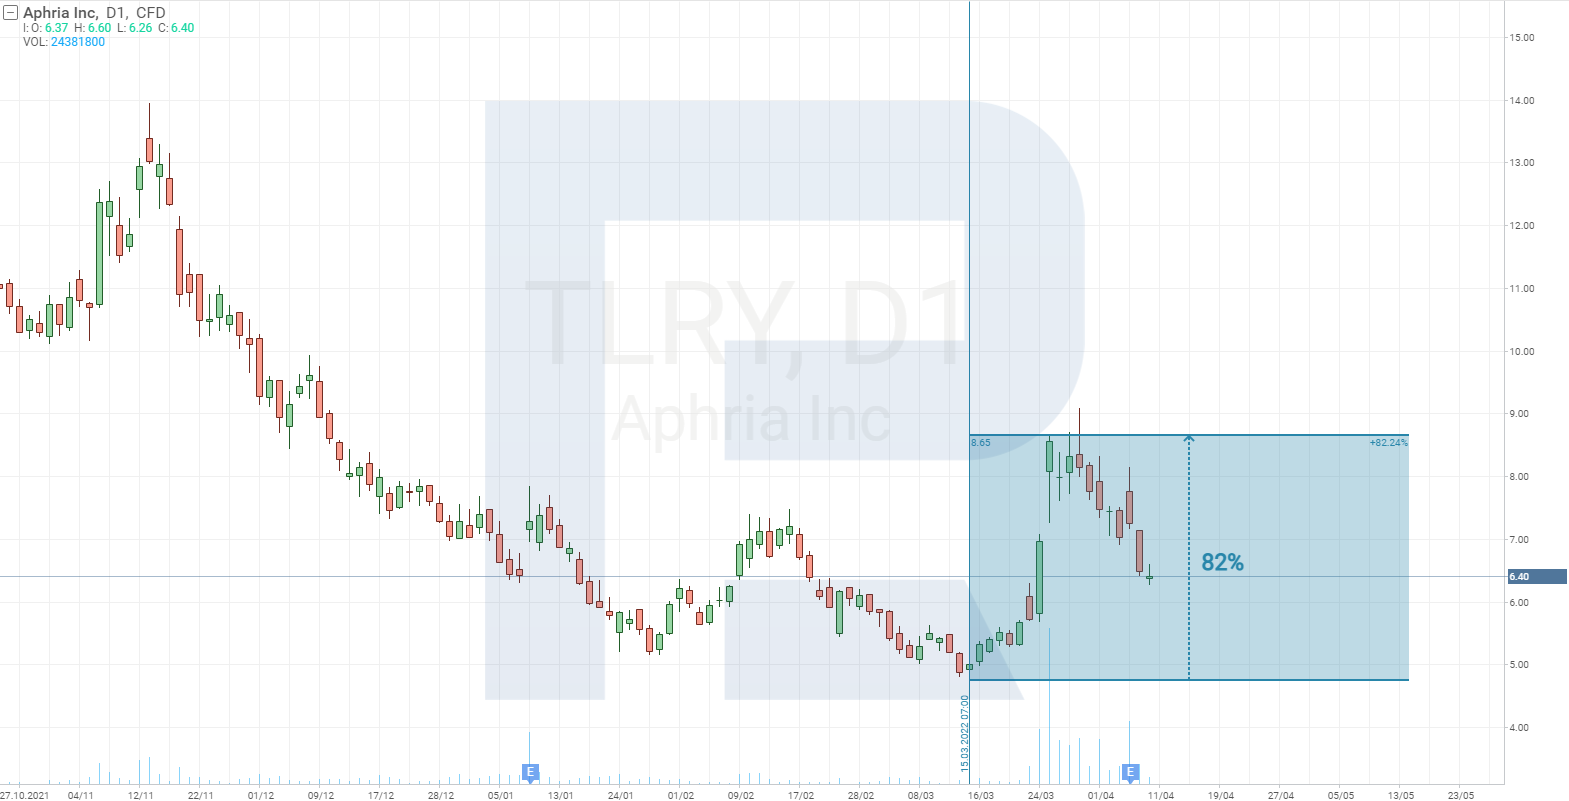 Tlry share price